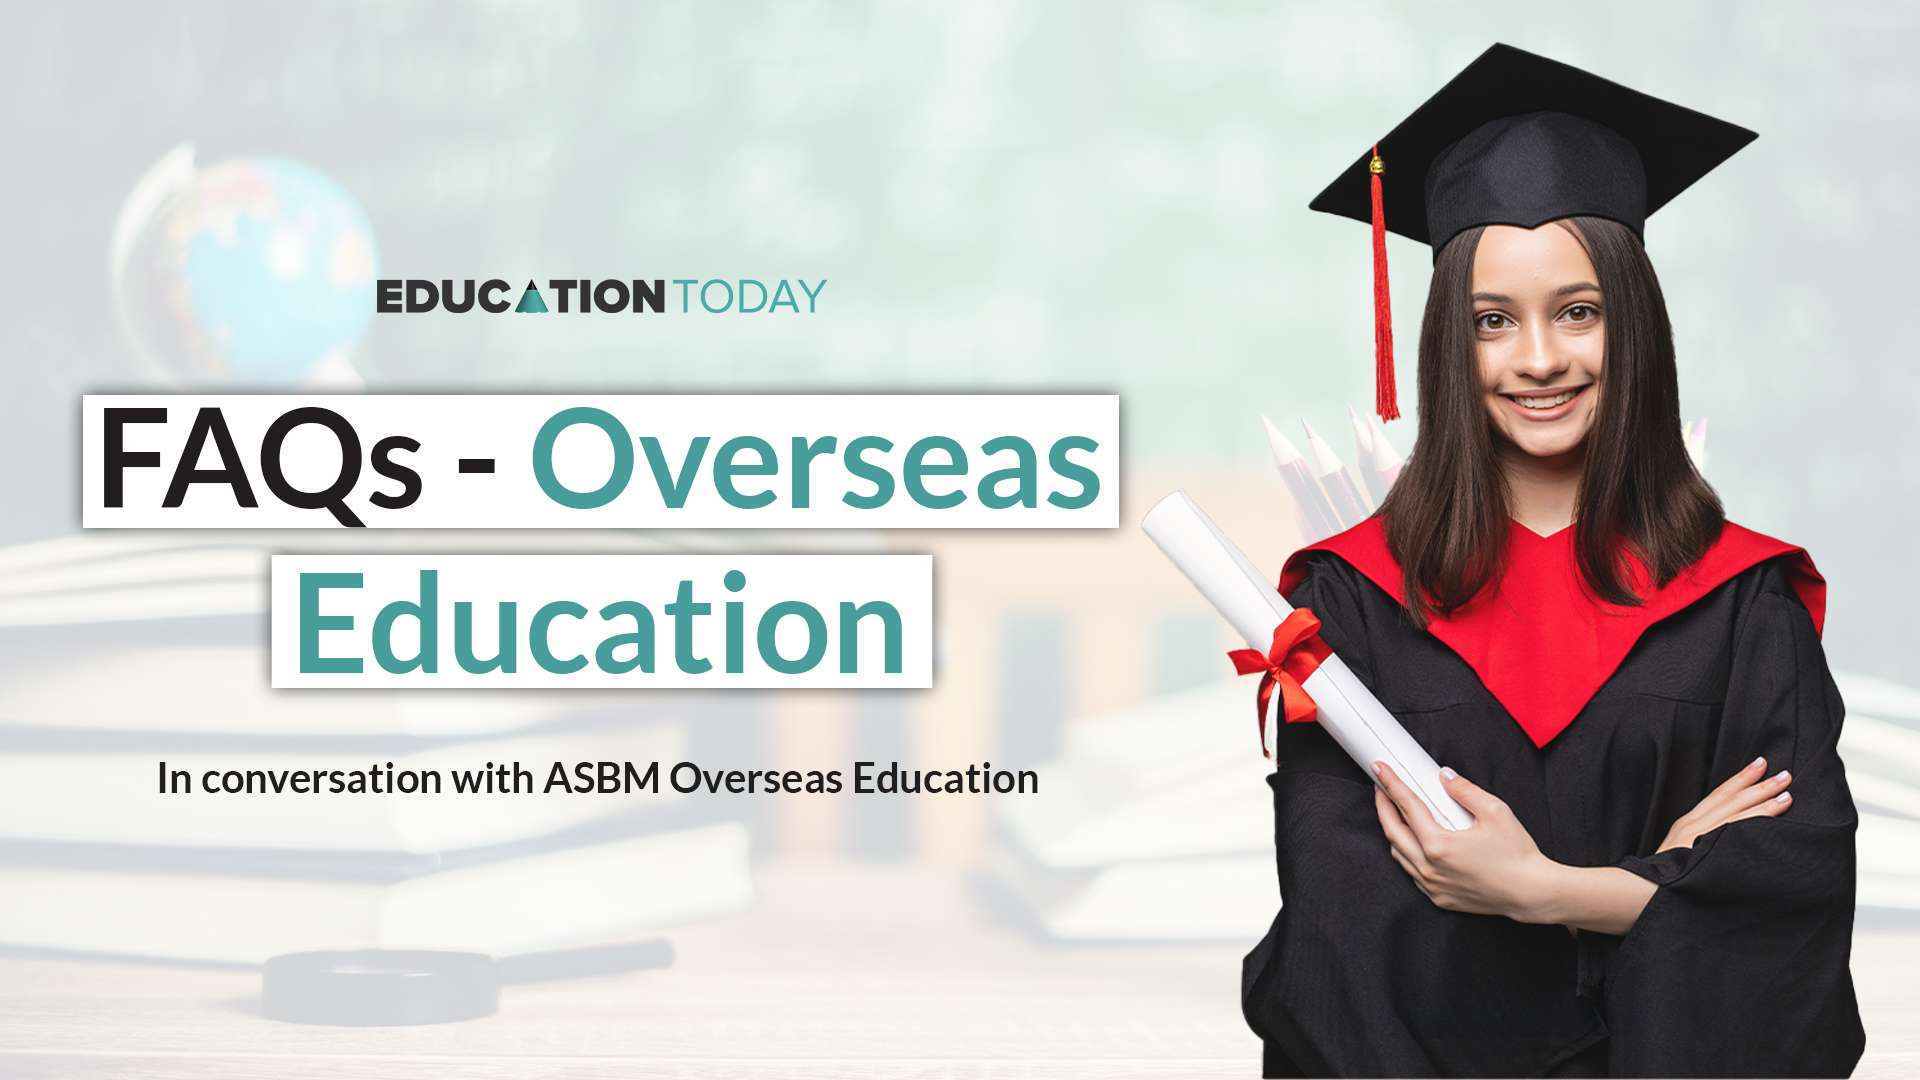 Education Today in conversation with ASBM Overseas